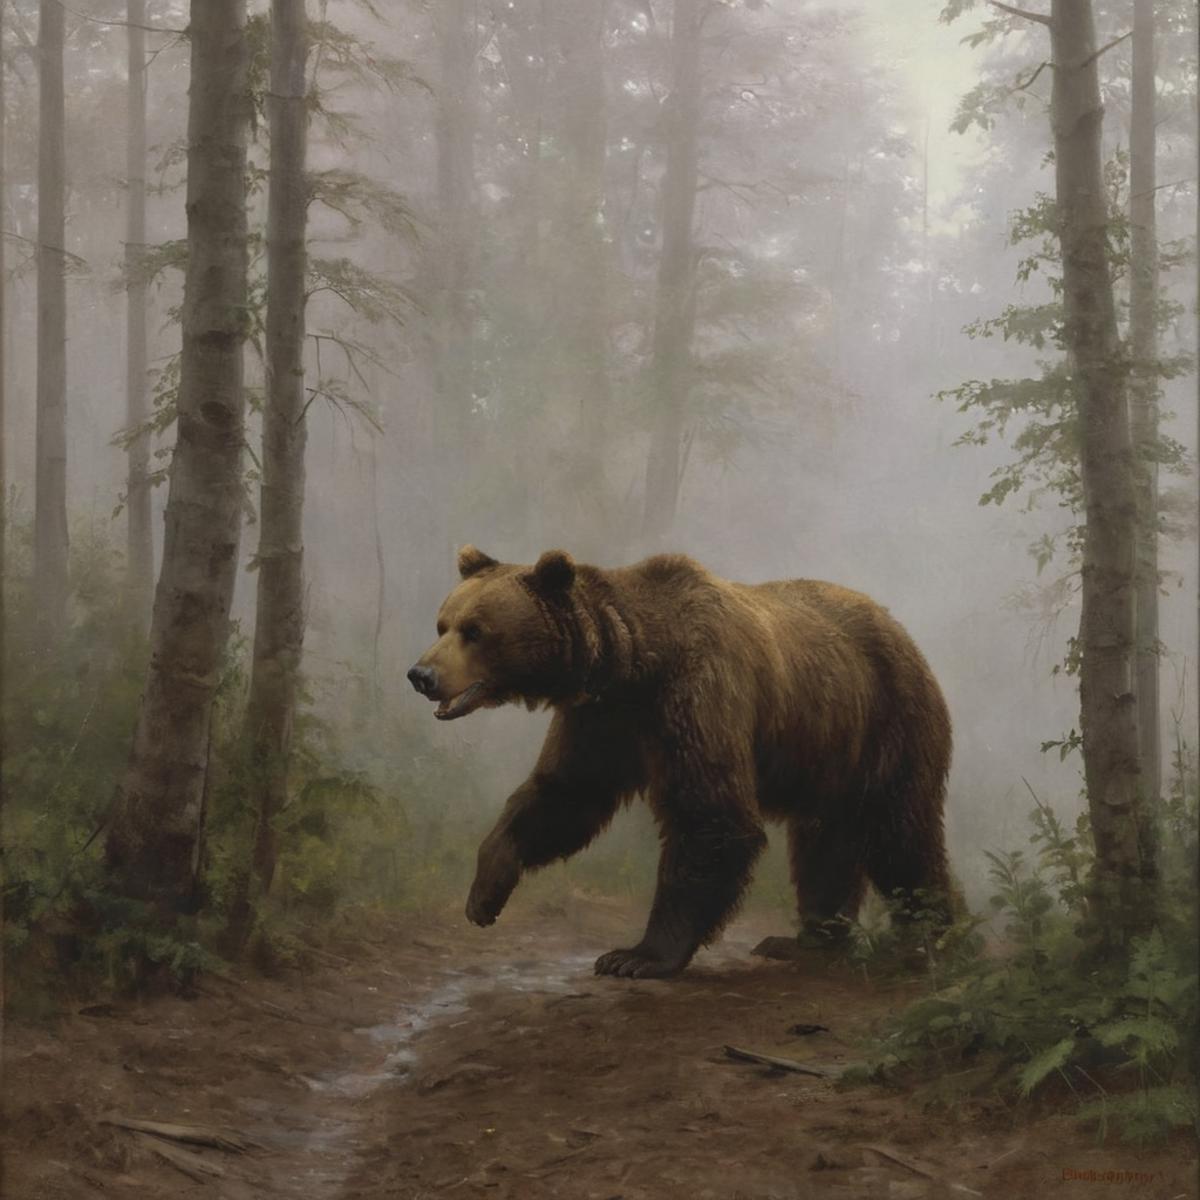 A large brown bear walking through a forest on a path.